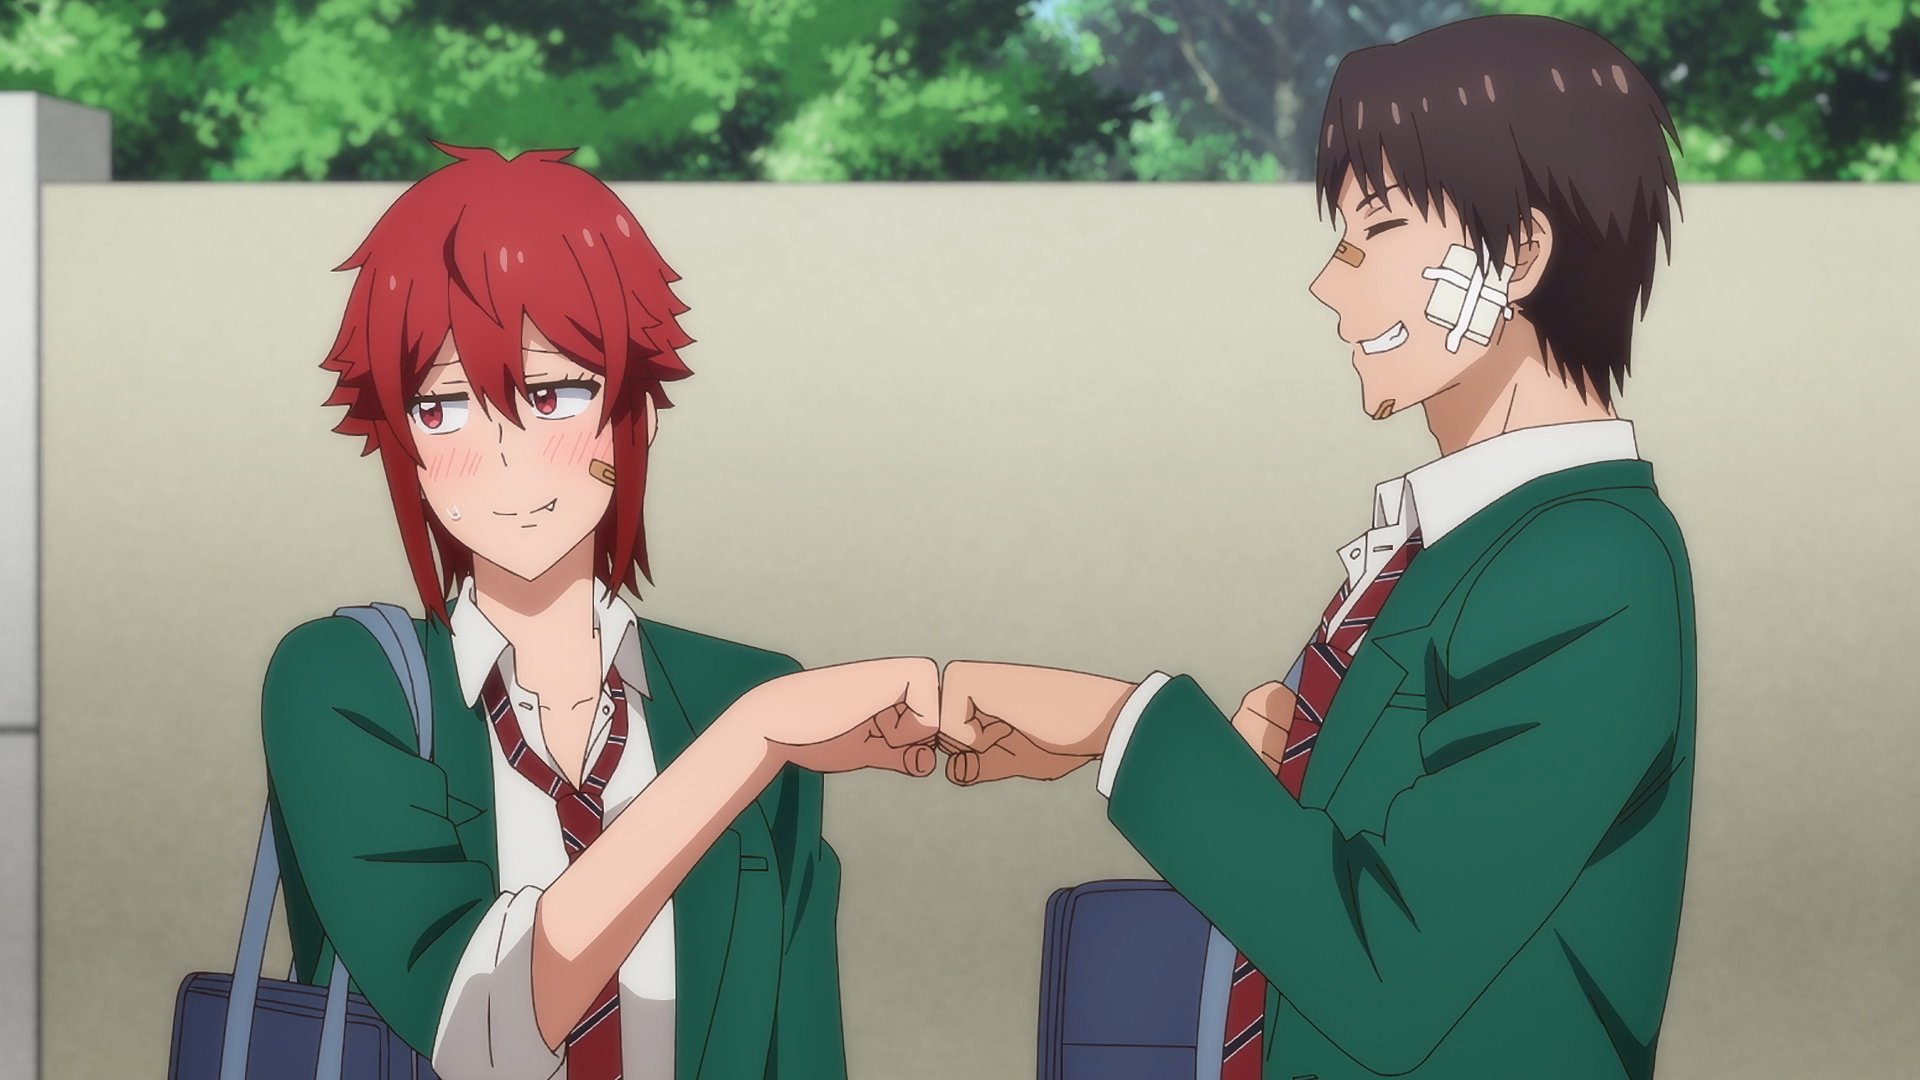 Tomo-chan is a girl] She's the voice of Carol both in english and